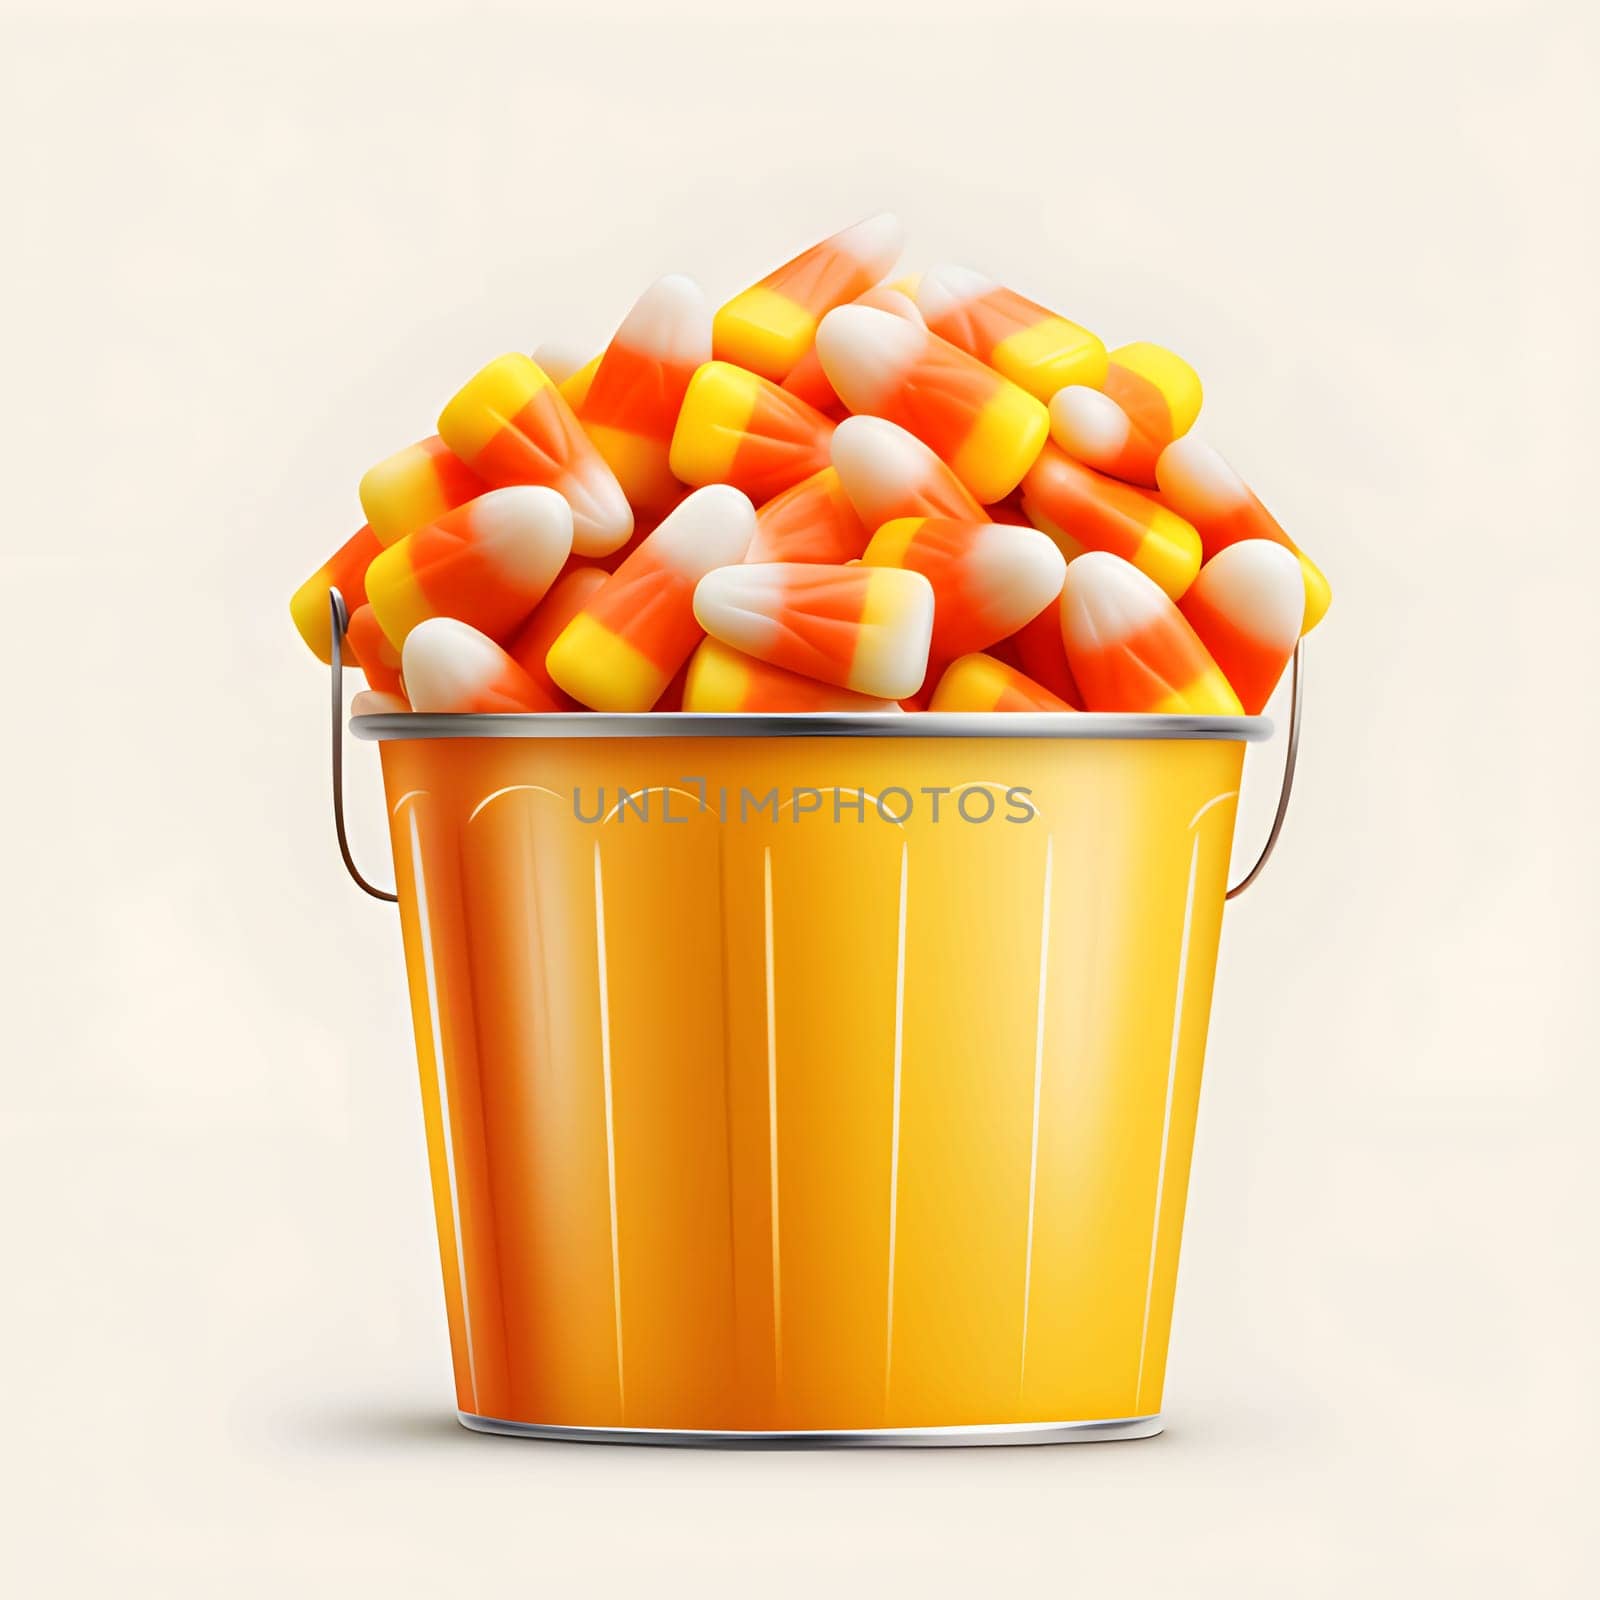 Bucket with corn kernels. Corn as a dish of thanksgiving for the harvest, a picture on a white isolated background. An atmosphere of joy and celebration.